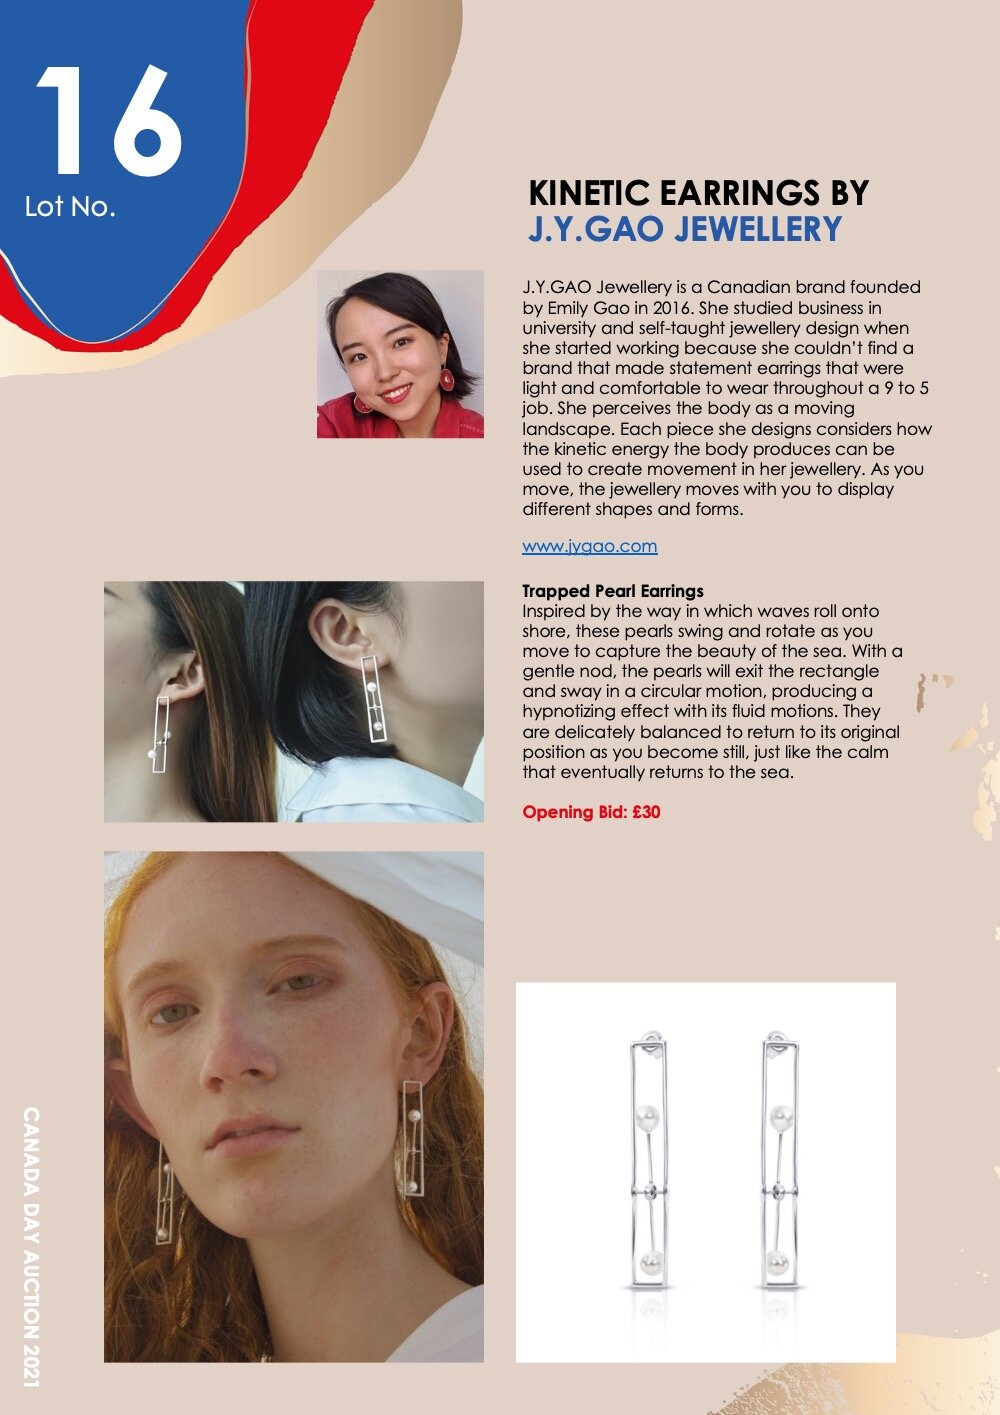   Lot 16: KINETIC EARRINGS BY     J.Y.GAO JEWELLERY    J.Y.GAO Jewellery is a Canadian brand founded by Emily Gao in 2016. She studied business in university and self-taught jewellery design when she started working because she couldn’t find a brand 